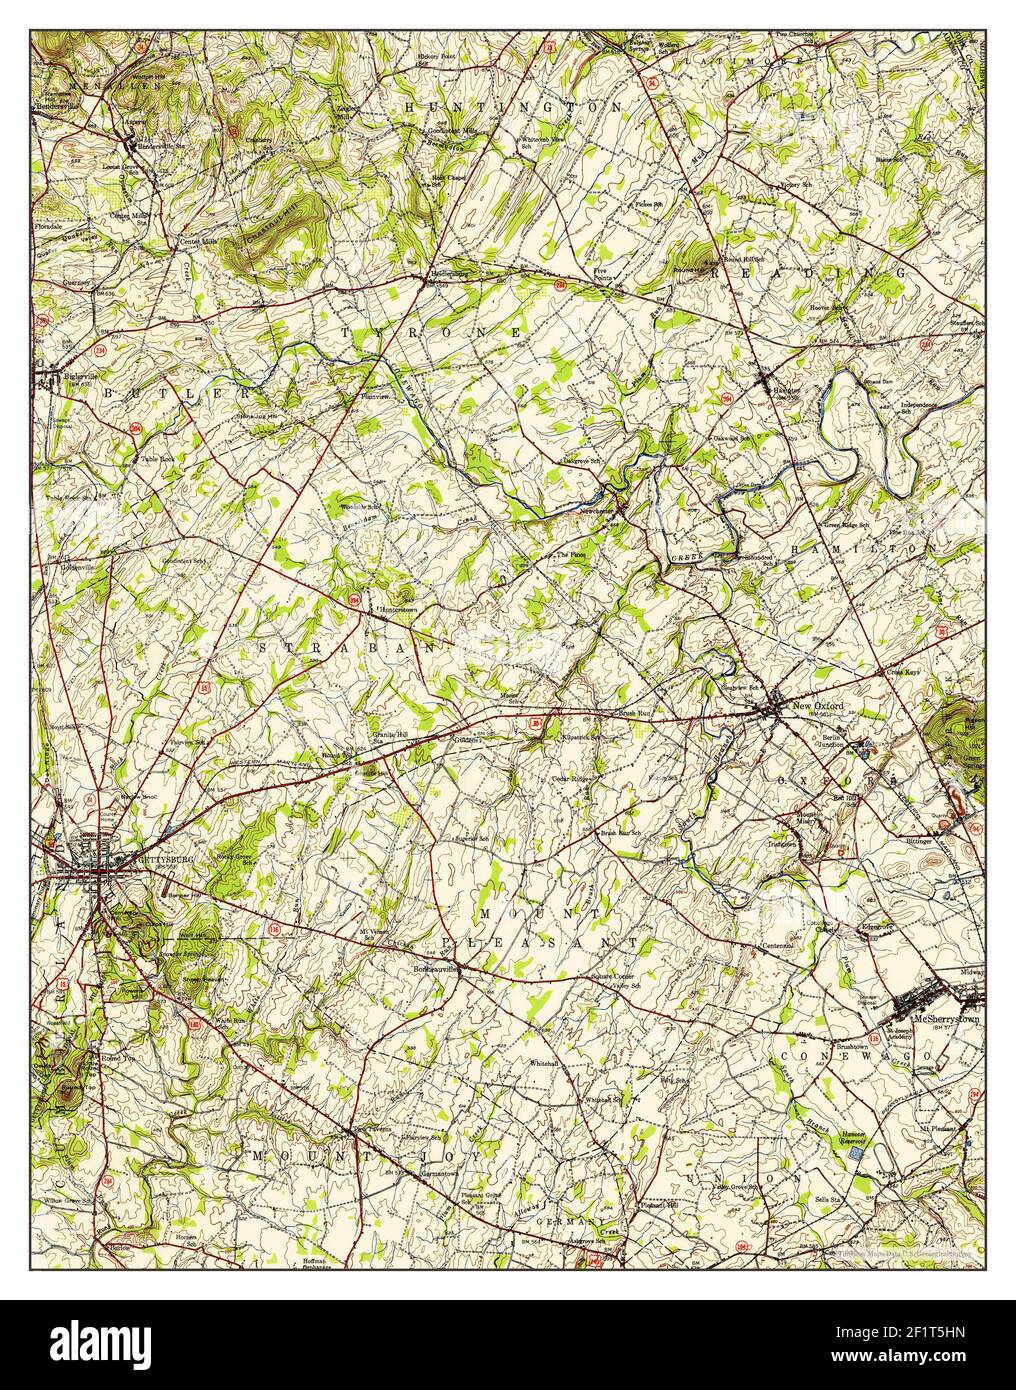 Gettysburg Pennsylvania Map 1951 162500 United States Of America By Timeless Maps Data Us Geological Survey 2F1T5HN 